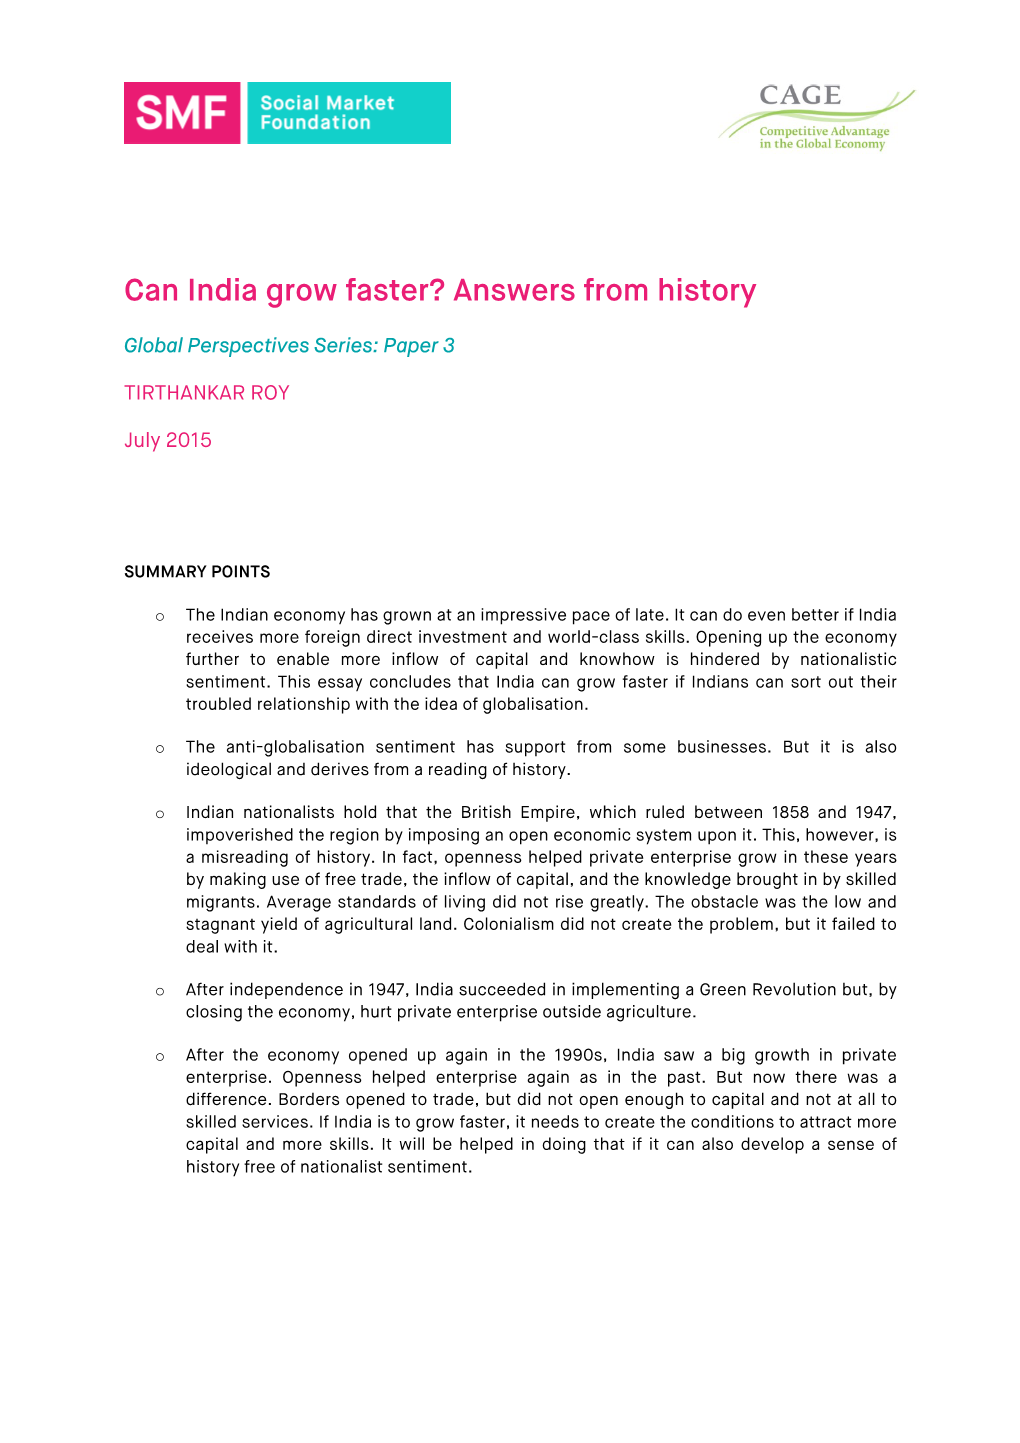 Can India Grow Faster? Answers from History